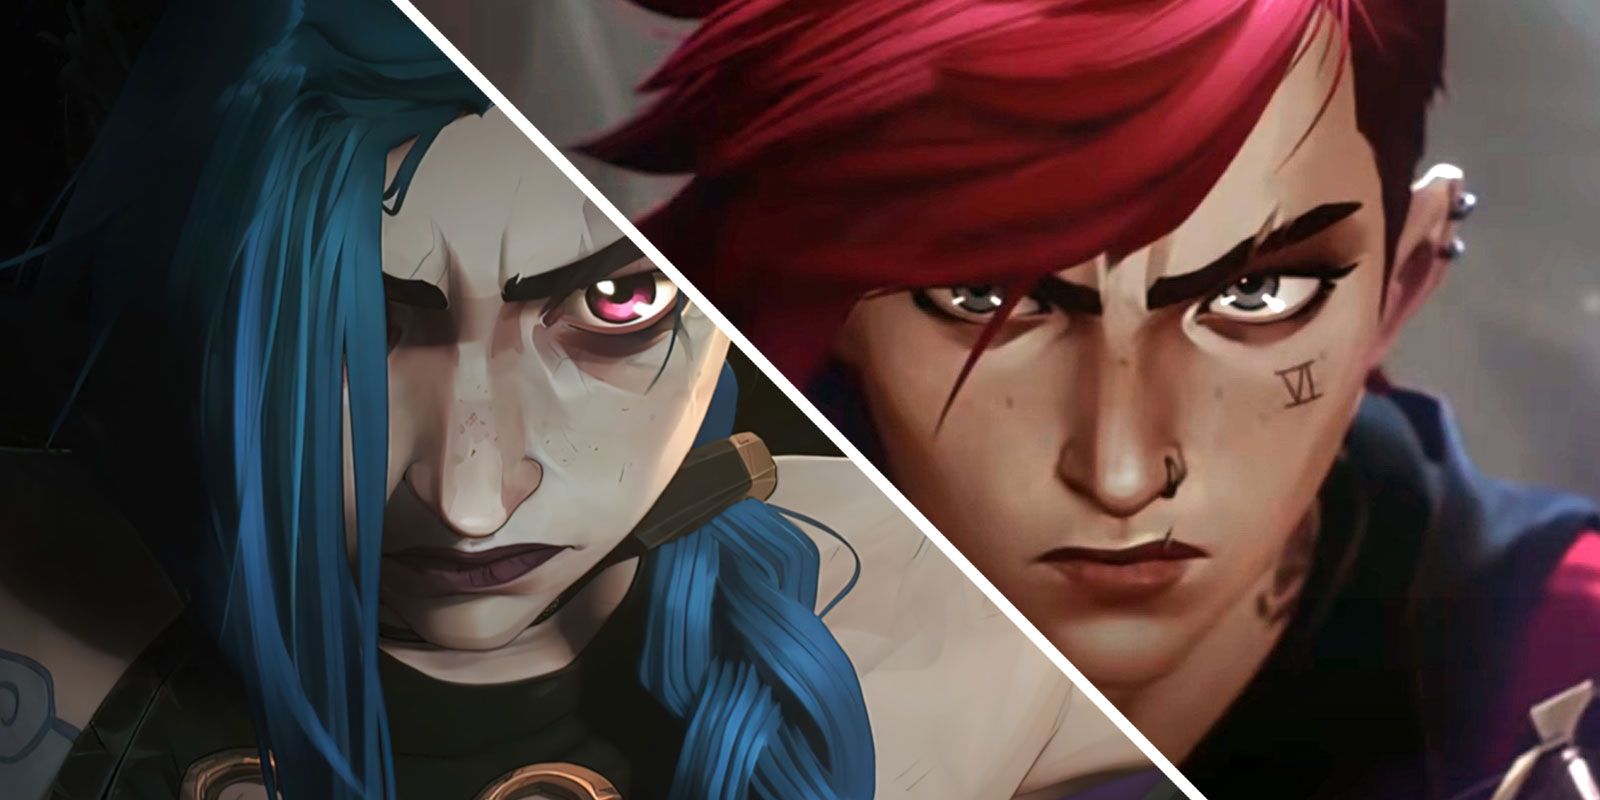 Split image showing Vi and Jinx from Arcane